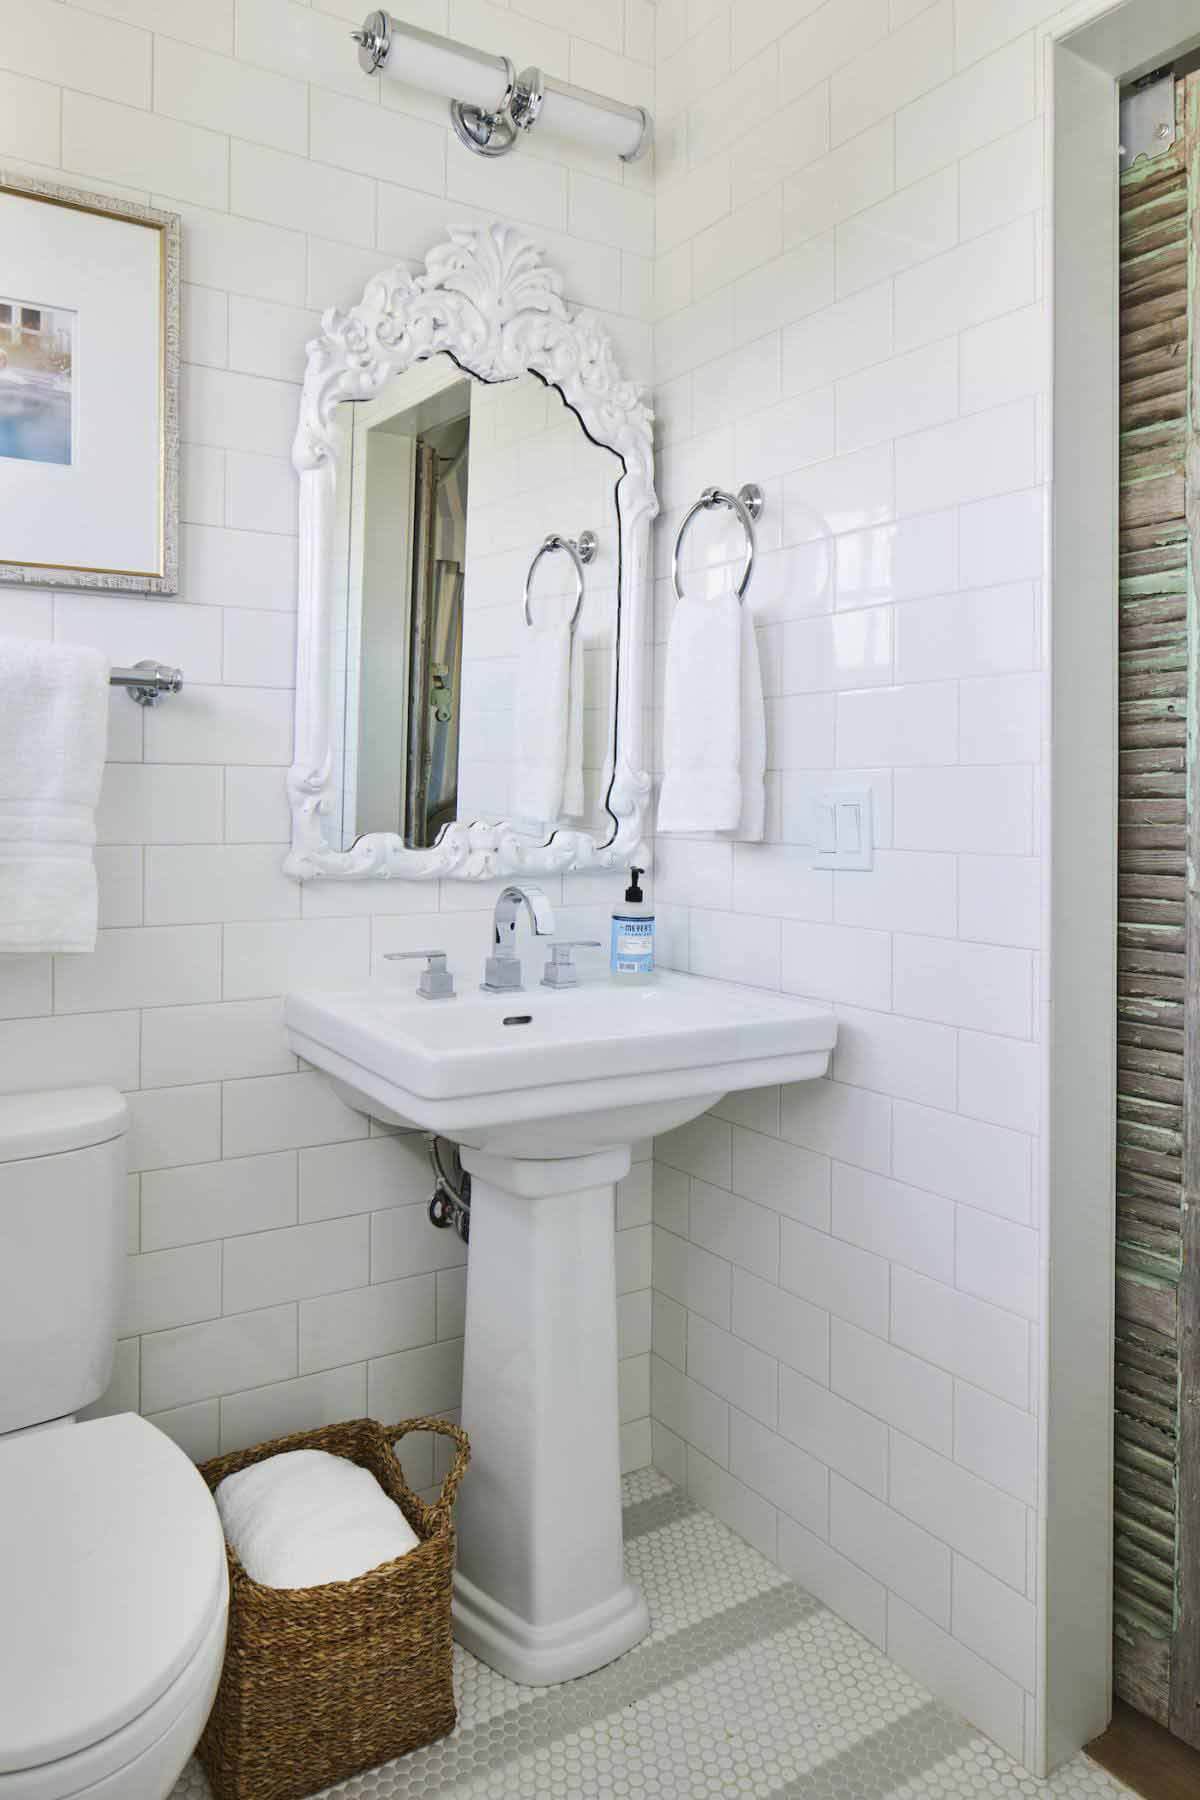 All-white bathroom in Florida home